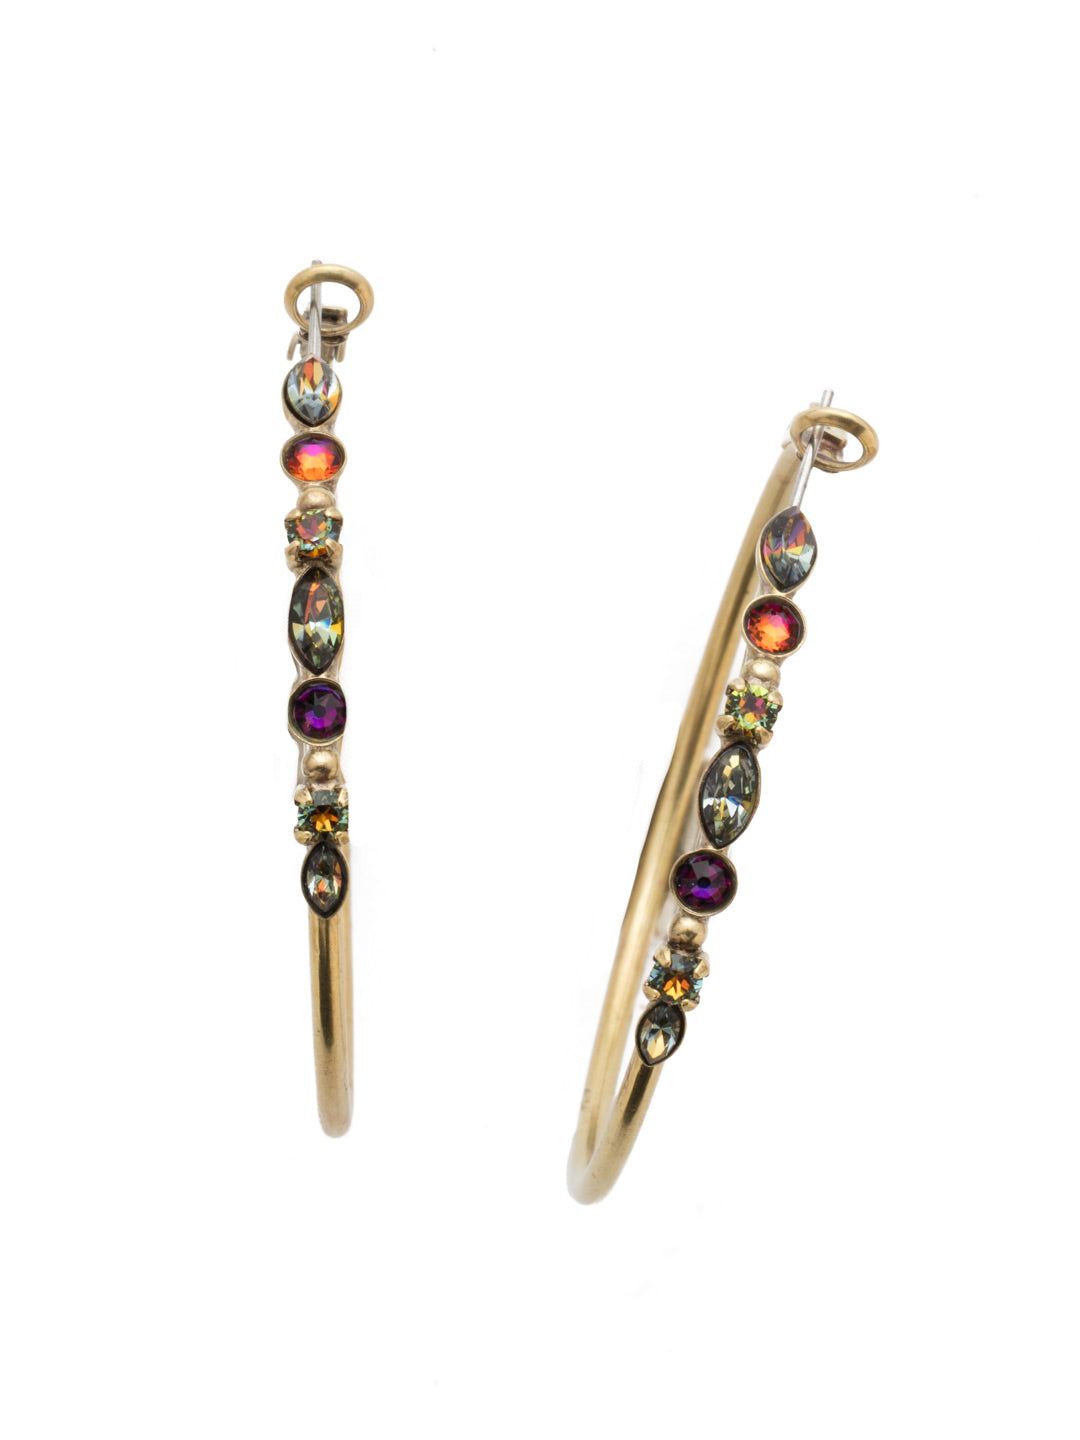 Mixed Media Hoop Earrings - EDK40AGVO - <p>Hoop earrings with a line of assorted crystals and semi-precious stones that will add the perfect hint of sparkle to your look. From Sorrelli's Volcano collection in our Antique Gold-tone finish.</p>